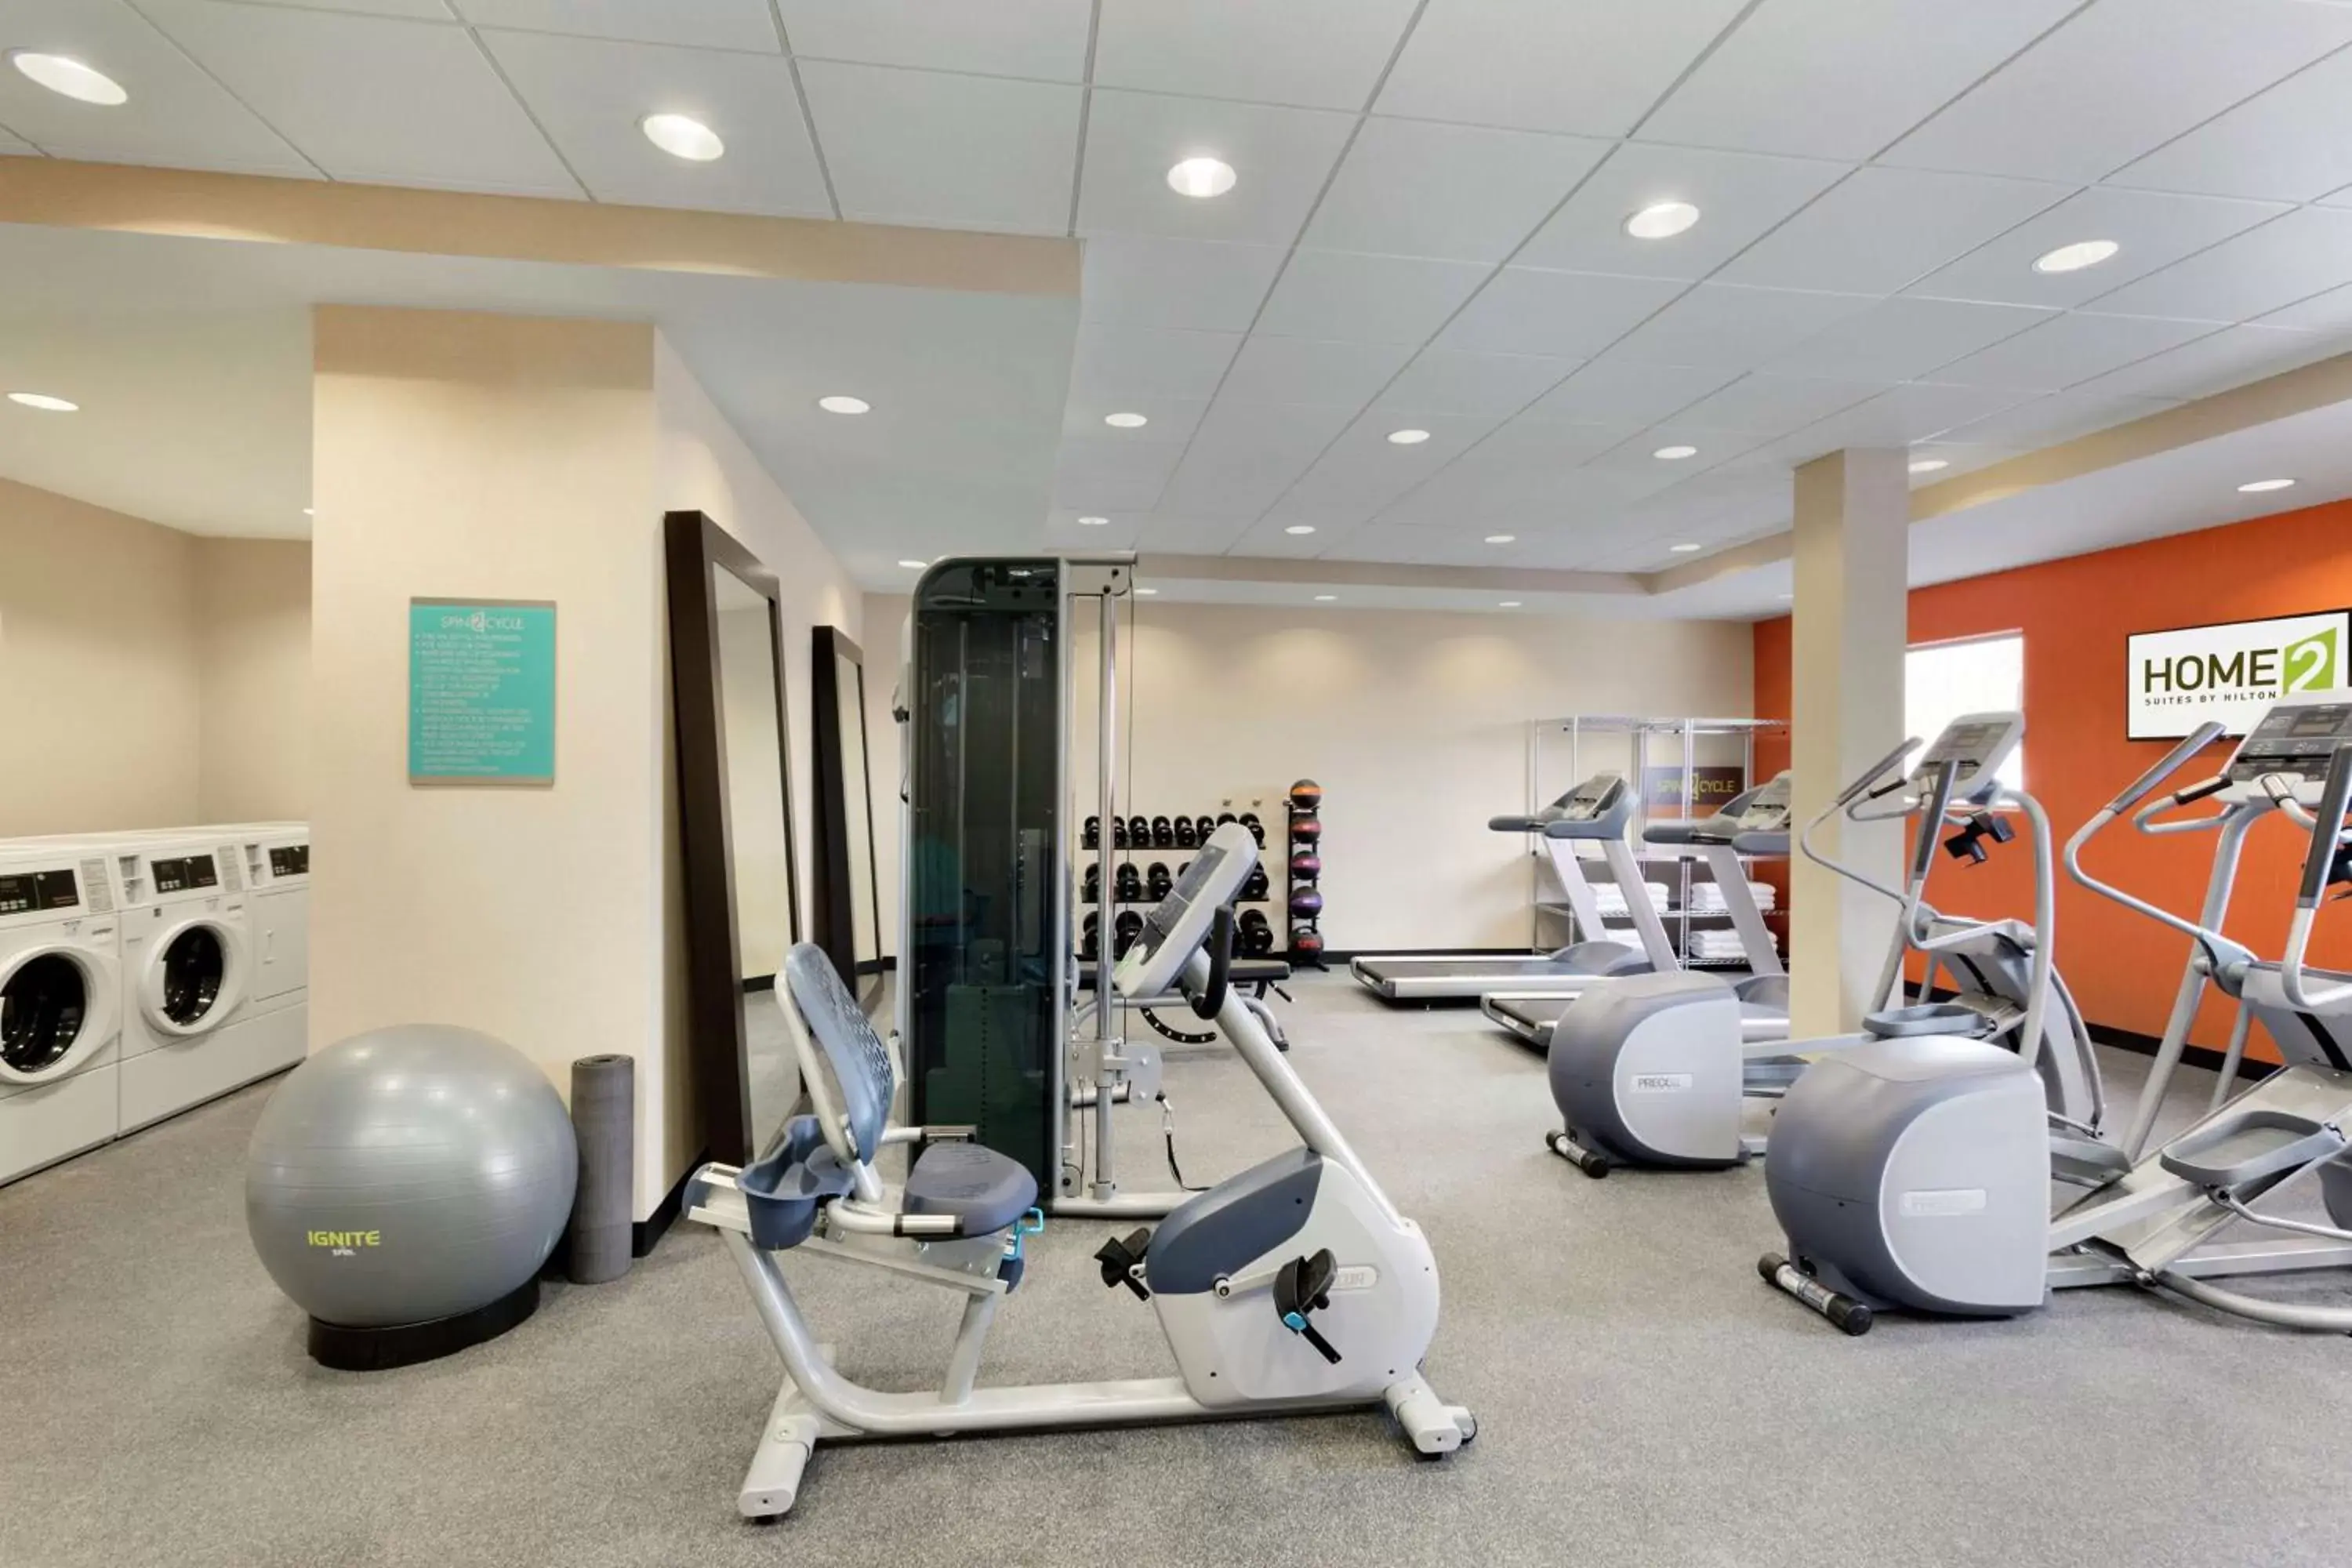 Fitness centre/facilities, Fitness Center/Facilities in Home2 Suites by Hilton Middletown